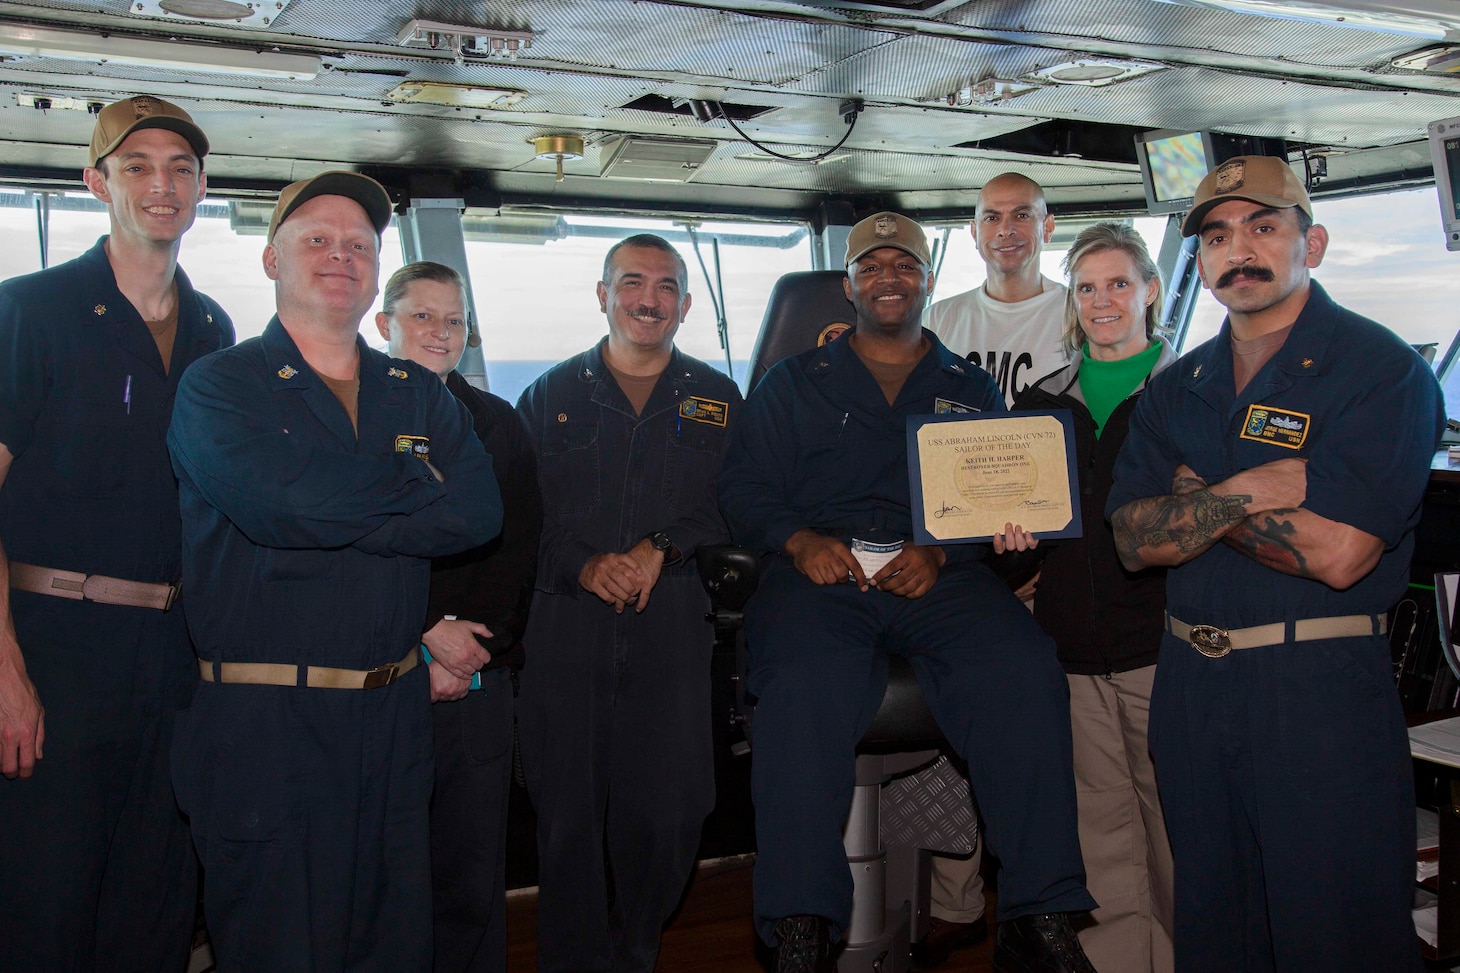 RP1 KEITH HARPER WINS USS ABRAHAM LINCOLN SAILOR OF THE DAY!